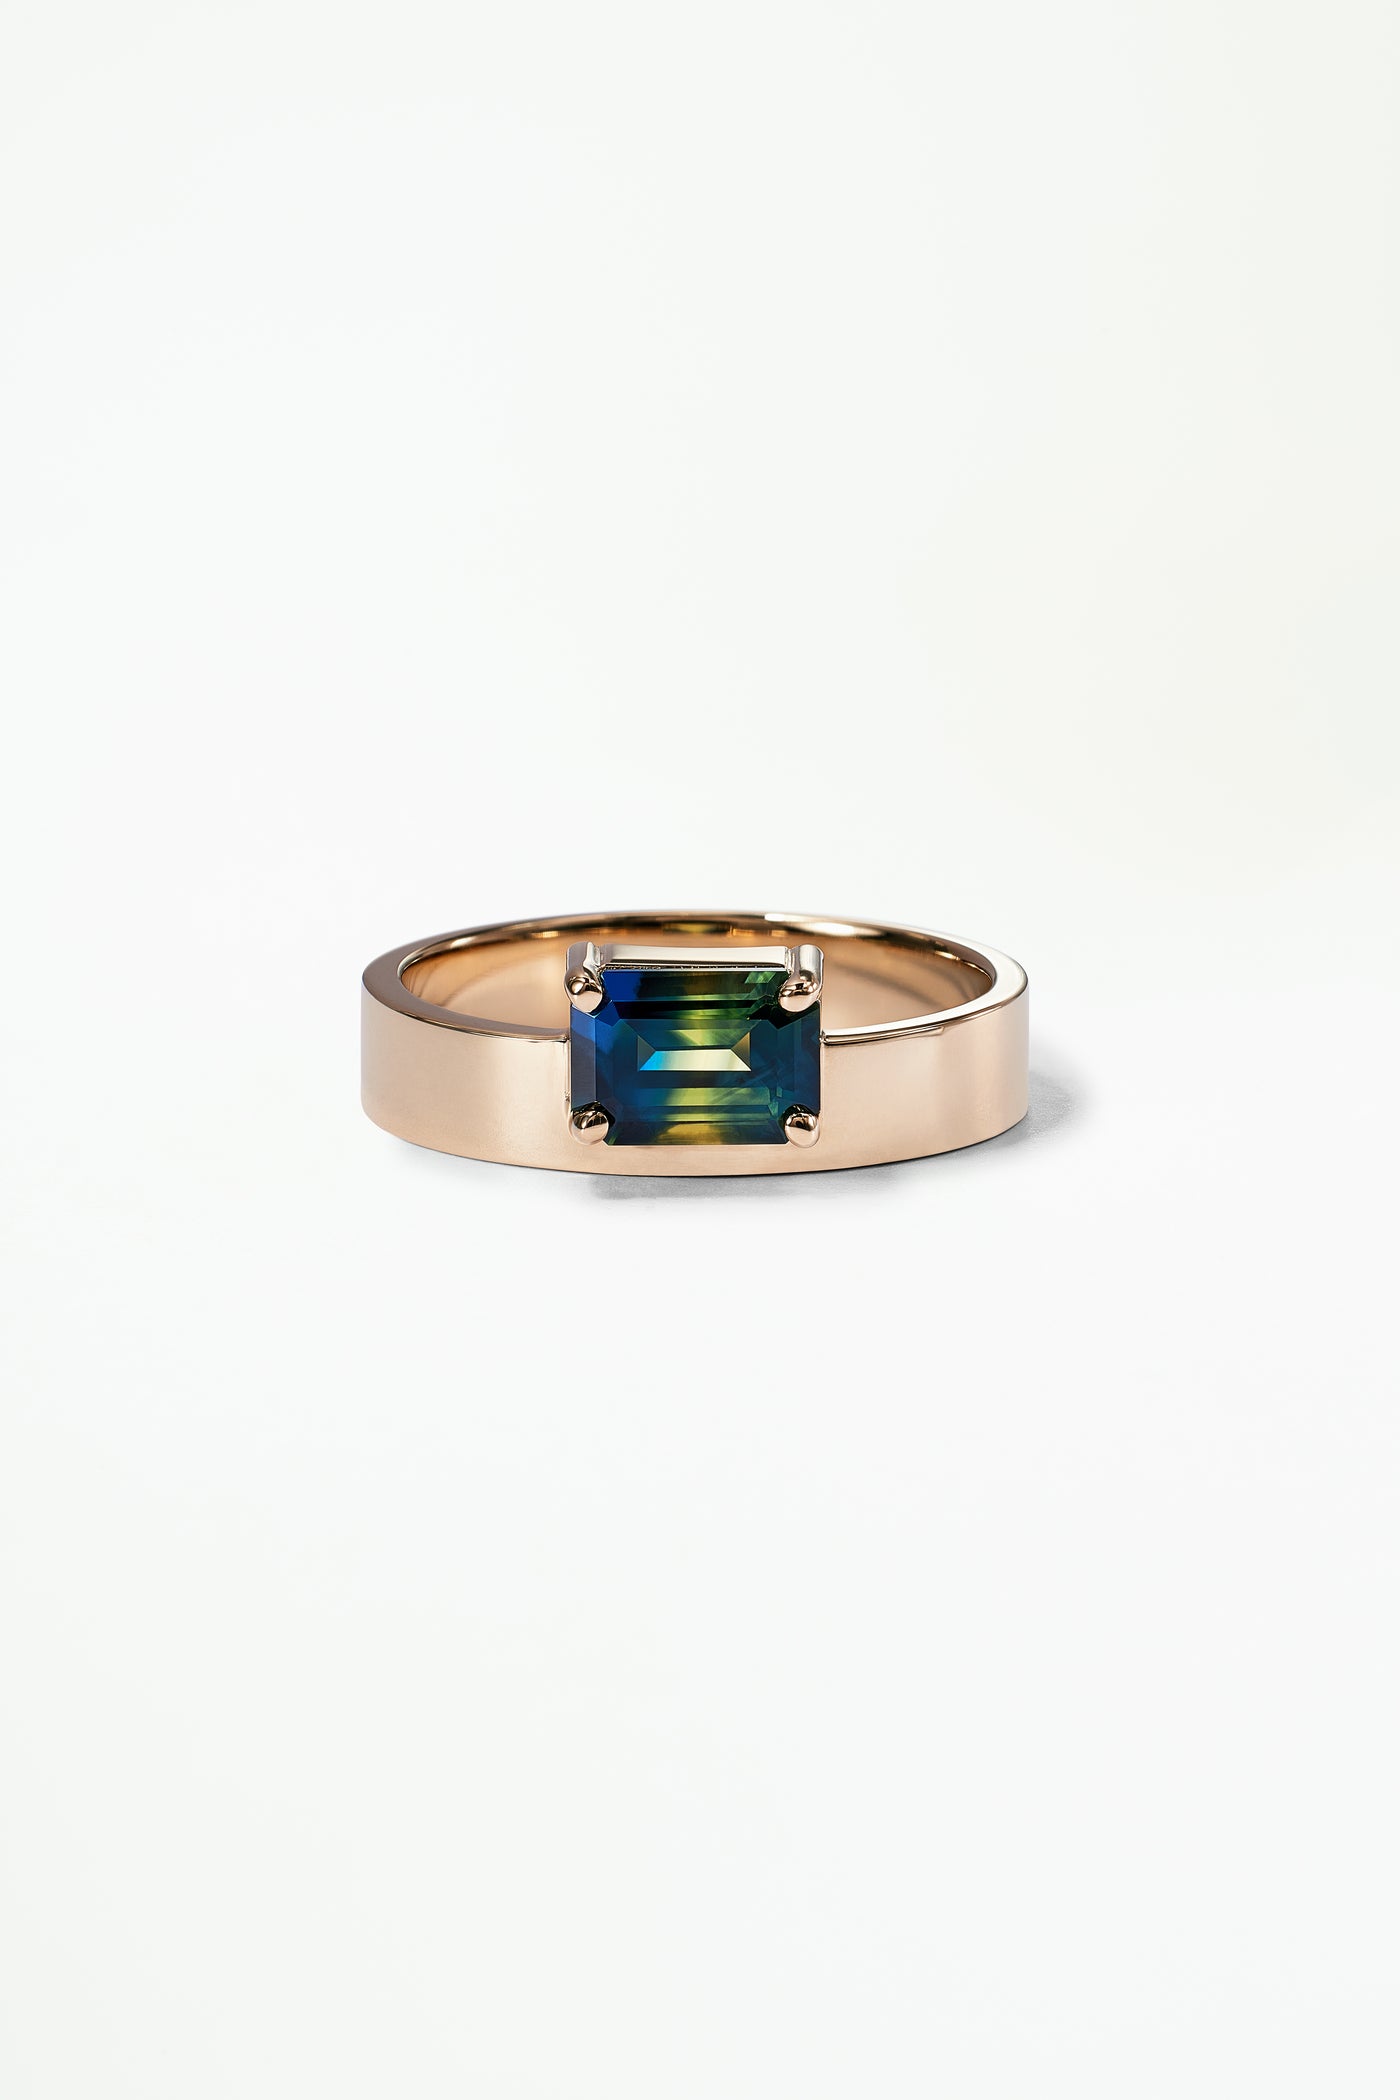 One of a Kind Emerald Cut Sapphire Monolith Ring No. 8